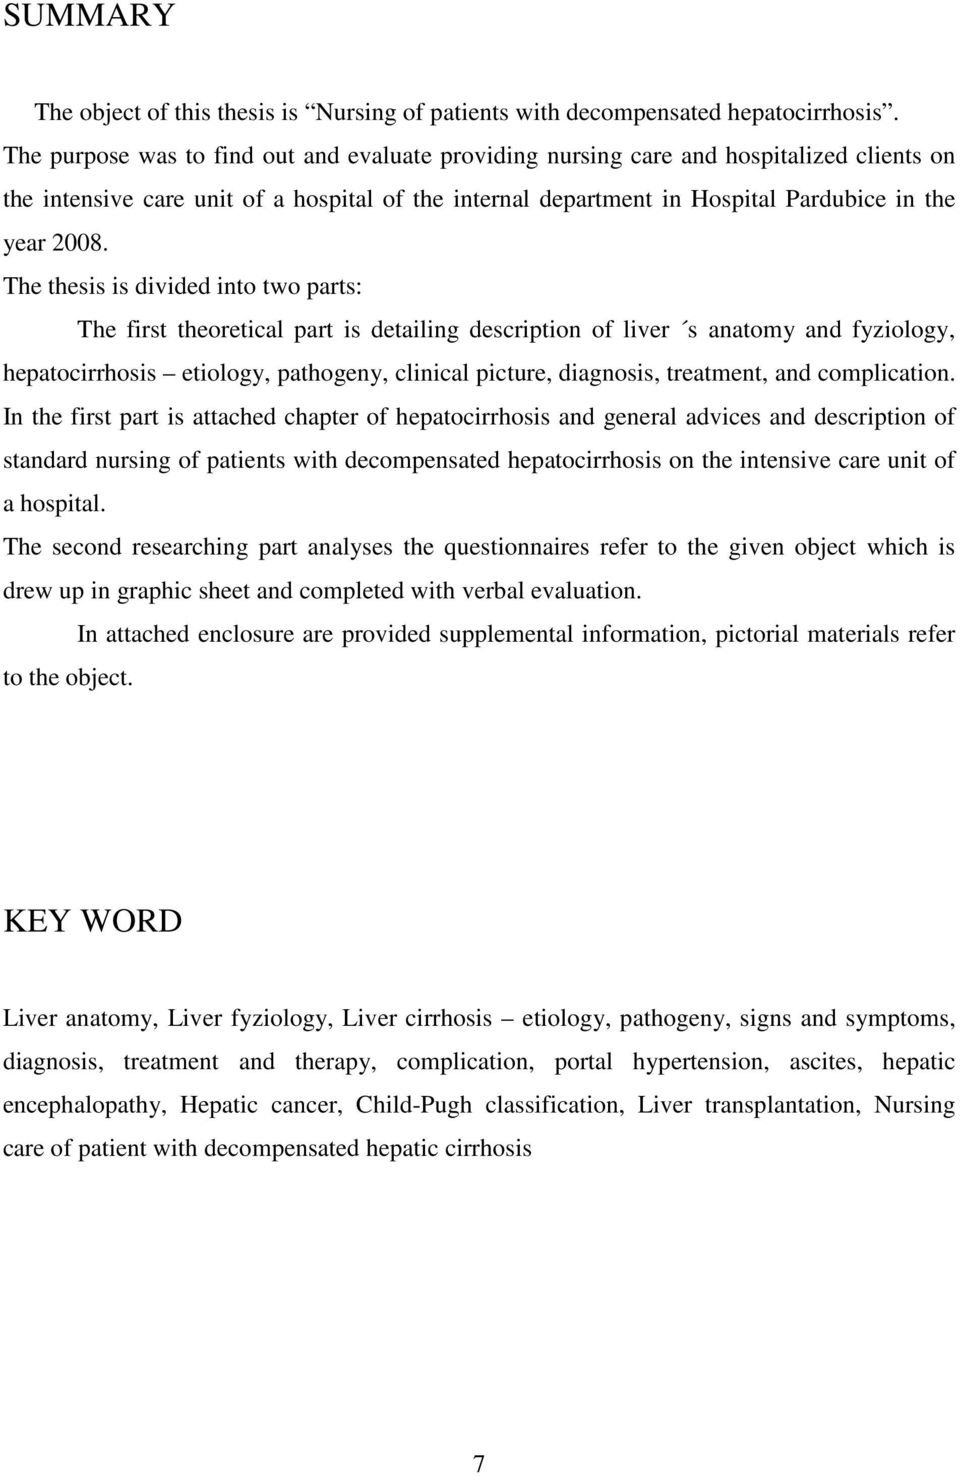 The thesis is divided into two parts: The first theoretical part is detailing description of liver s anatomy and fyziology, hepatocirrhosis etiology, pathogeny, clinical picture, diagnosis,